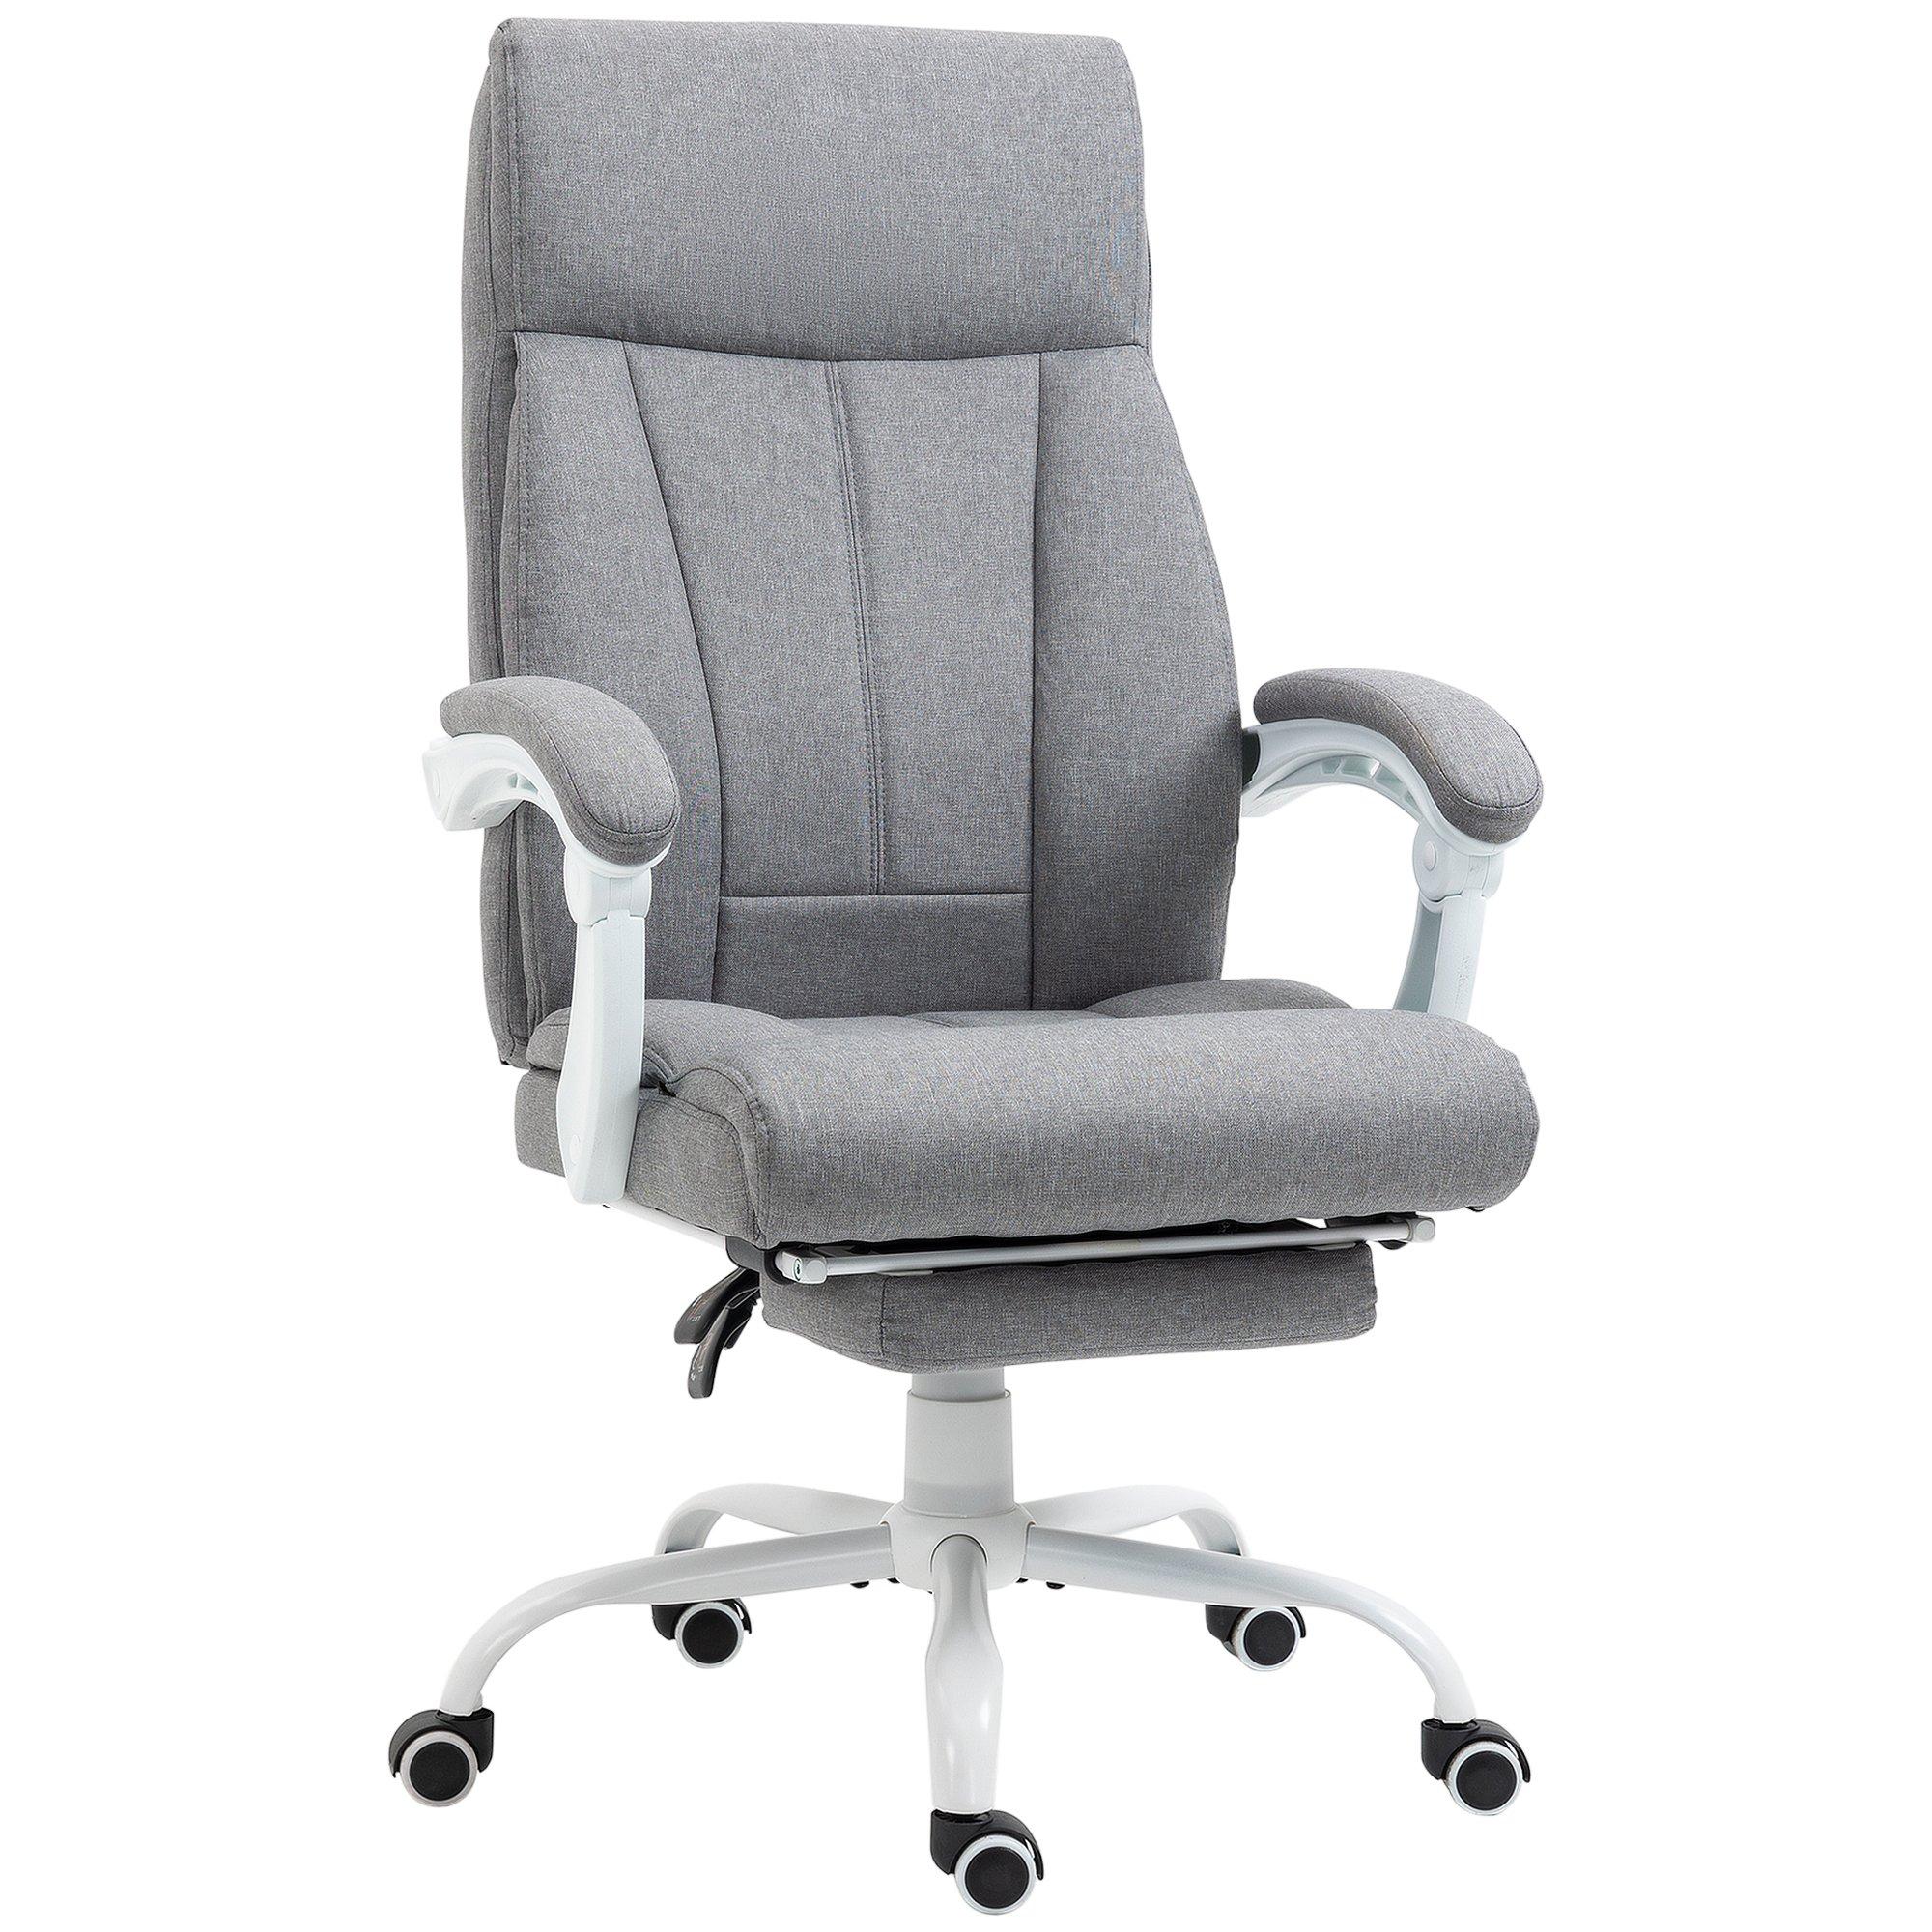 Executive Office Chair with Arm Footrest Linen Feel Fabric